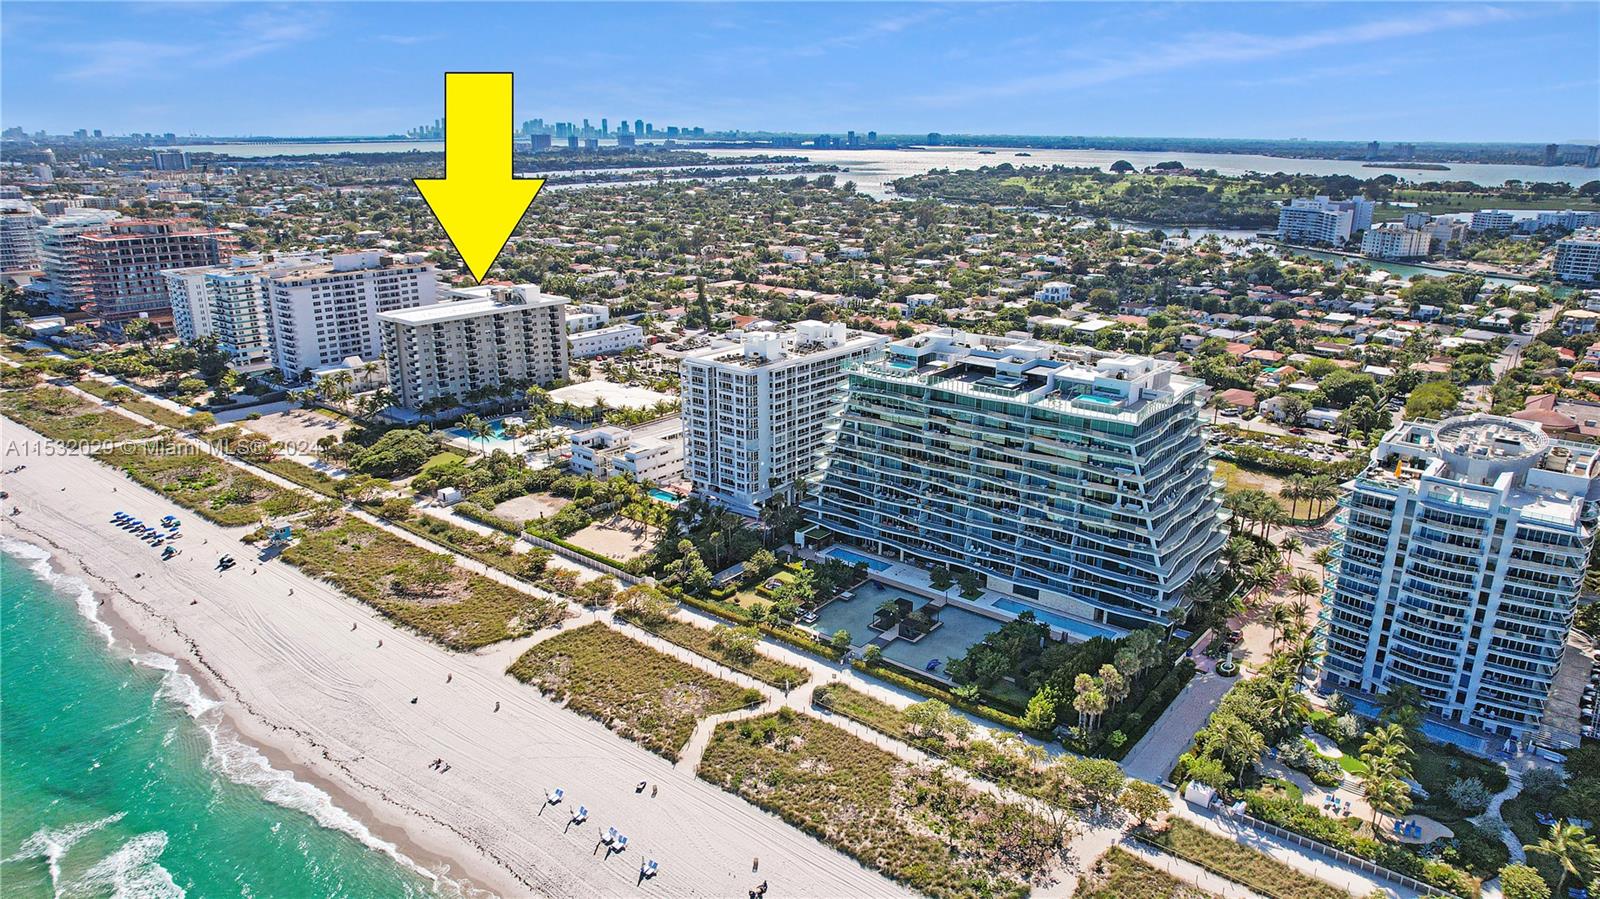 9273 Collins Ave Unit 1111, Surfside, Florida, 33154, United States, 1 Bedroom Bedrooms, ,2 BathroomsBathrooms,Residential,For Sale,9273 Collins Ave Unit 1111,1473701